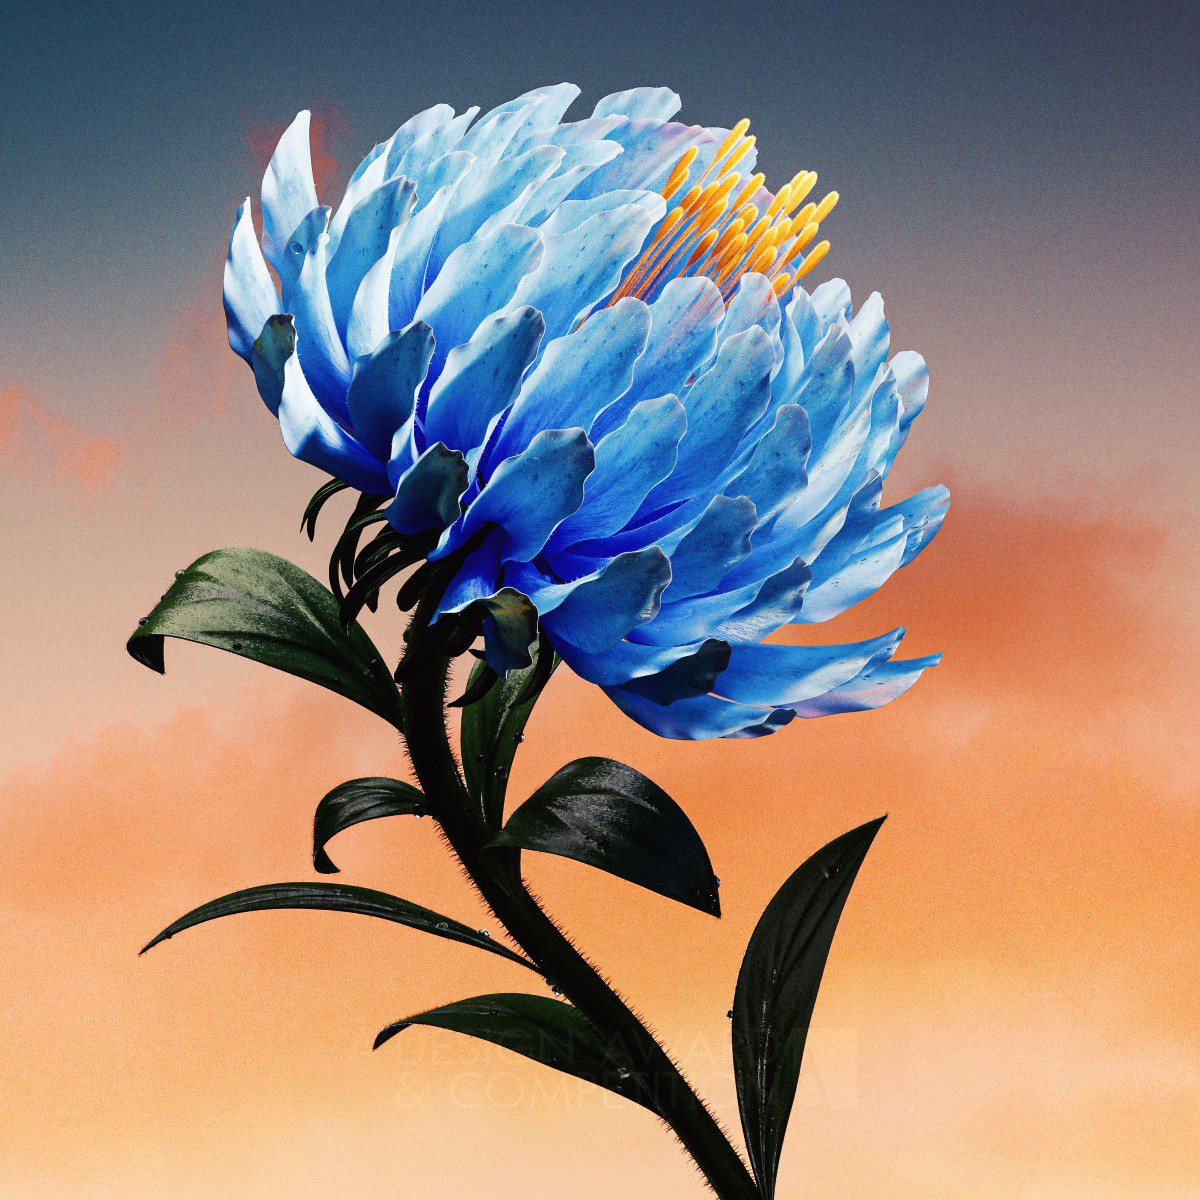 Procedural Flowers Digital Illustration by You Zhang